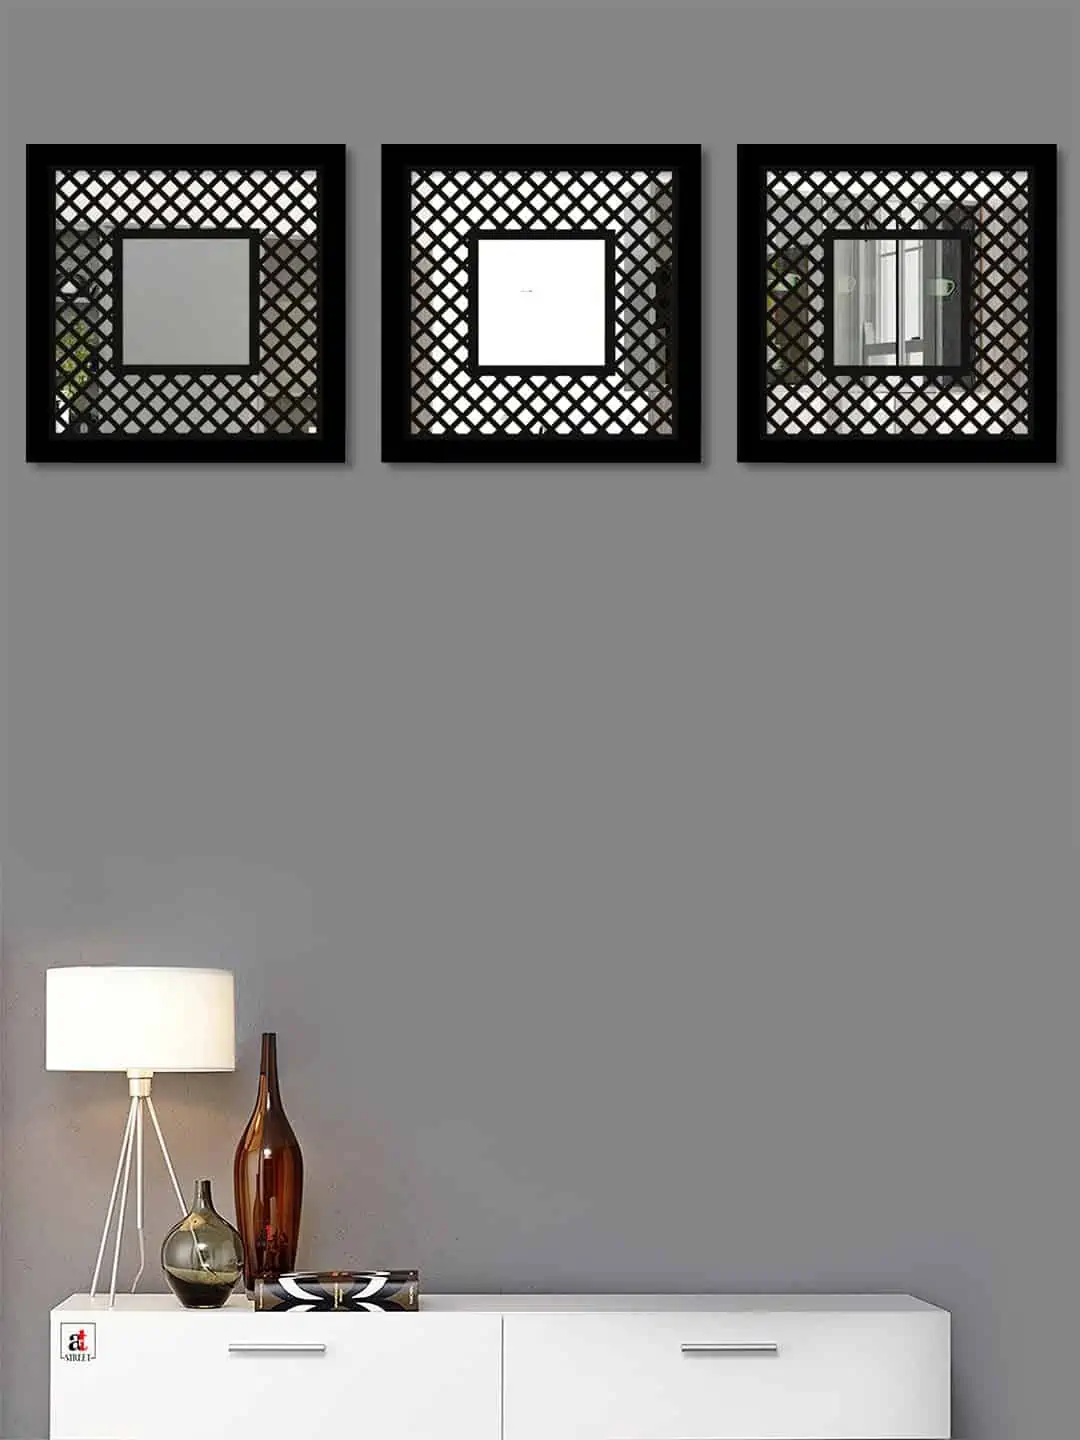 Black Set of 3 Square Shaped Mirror Wall Decors